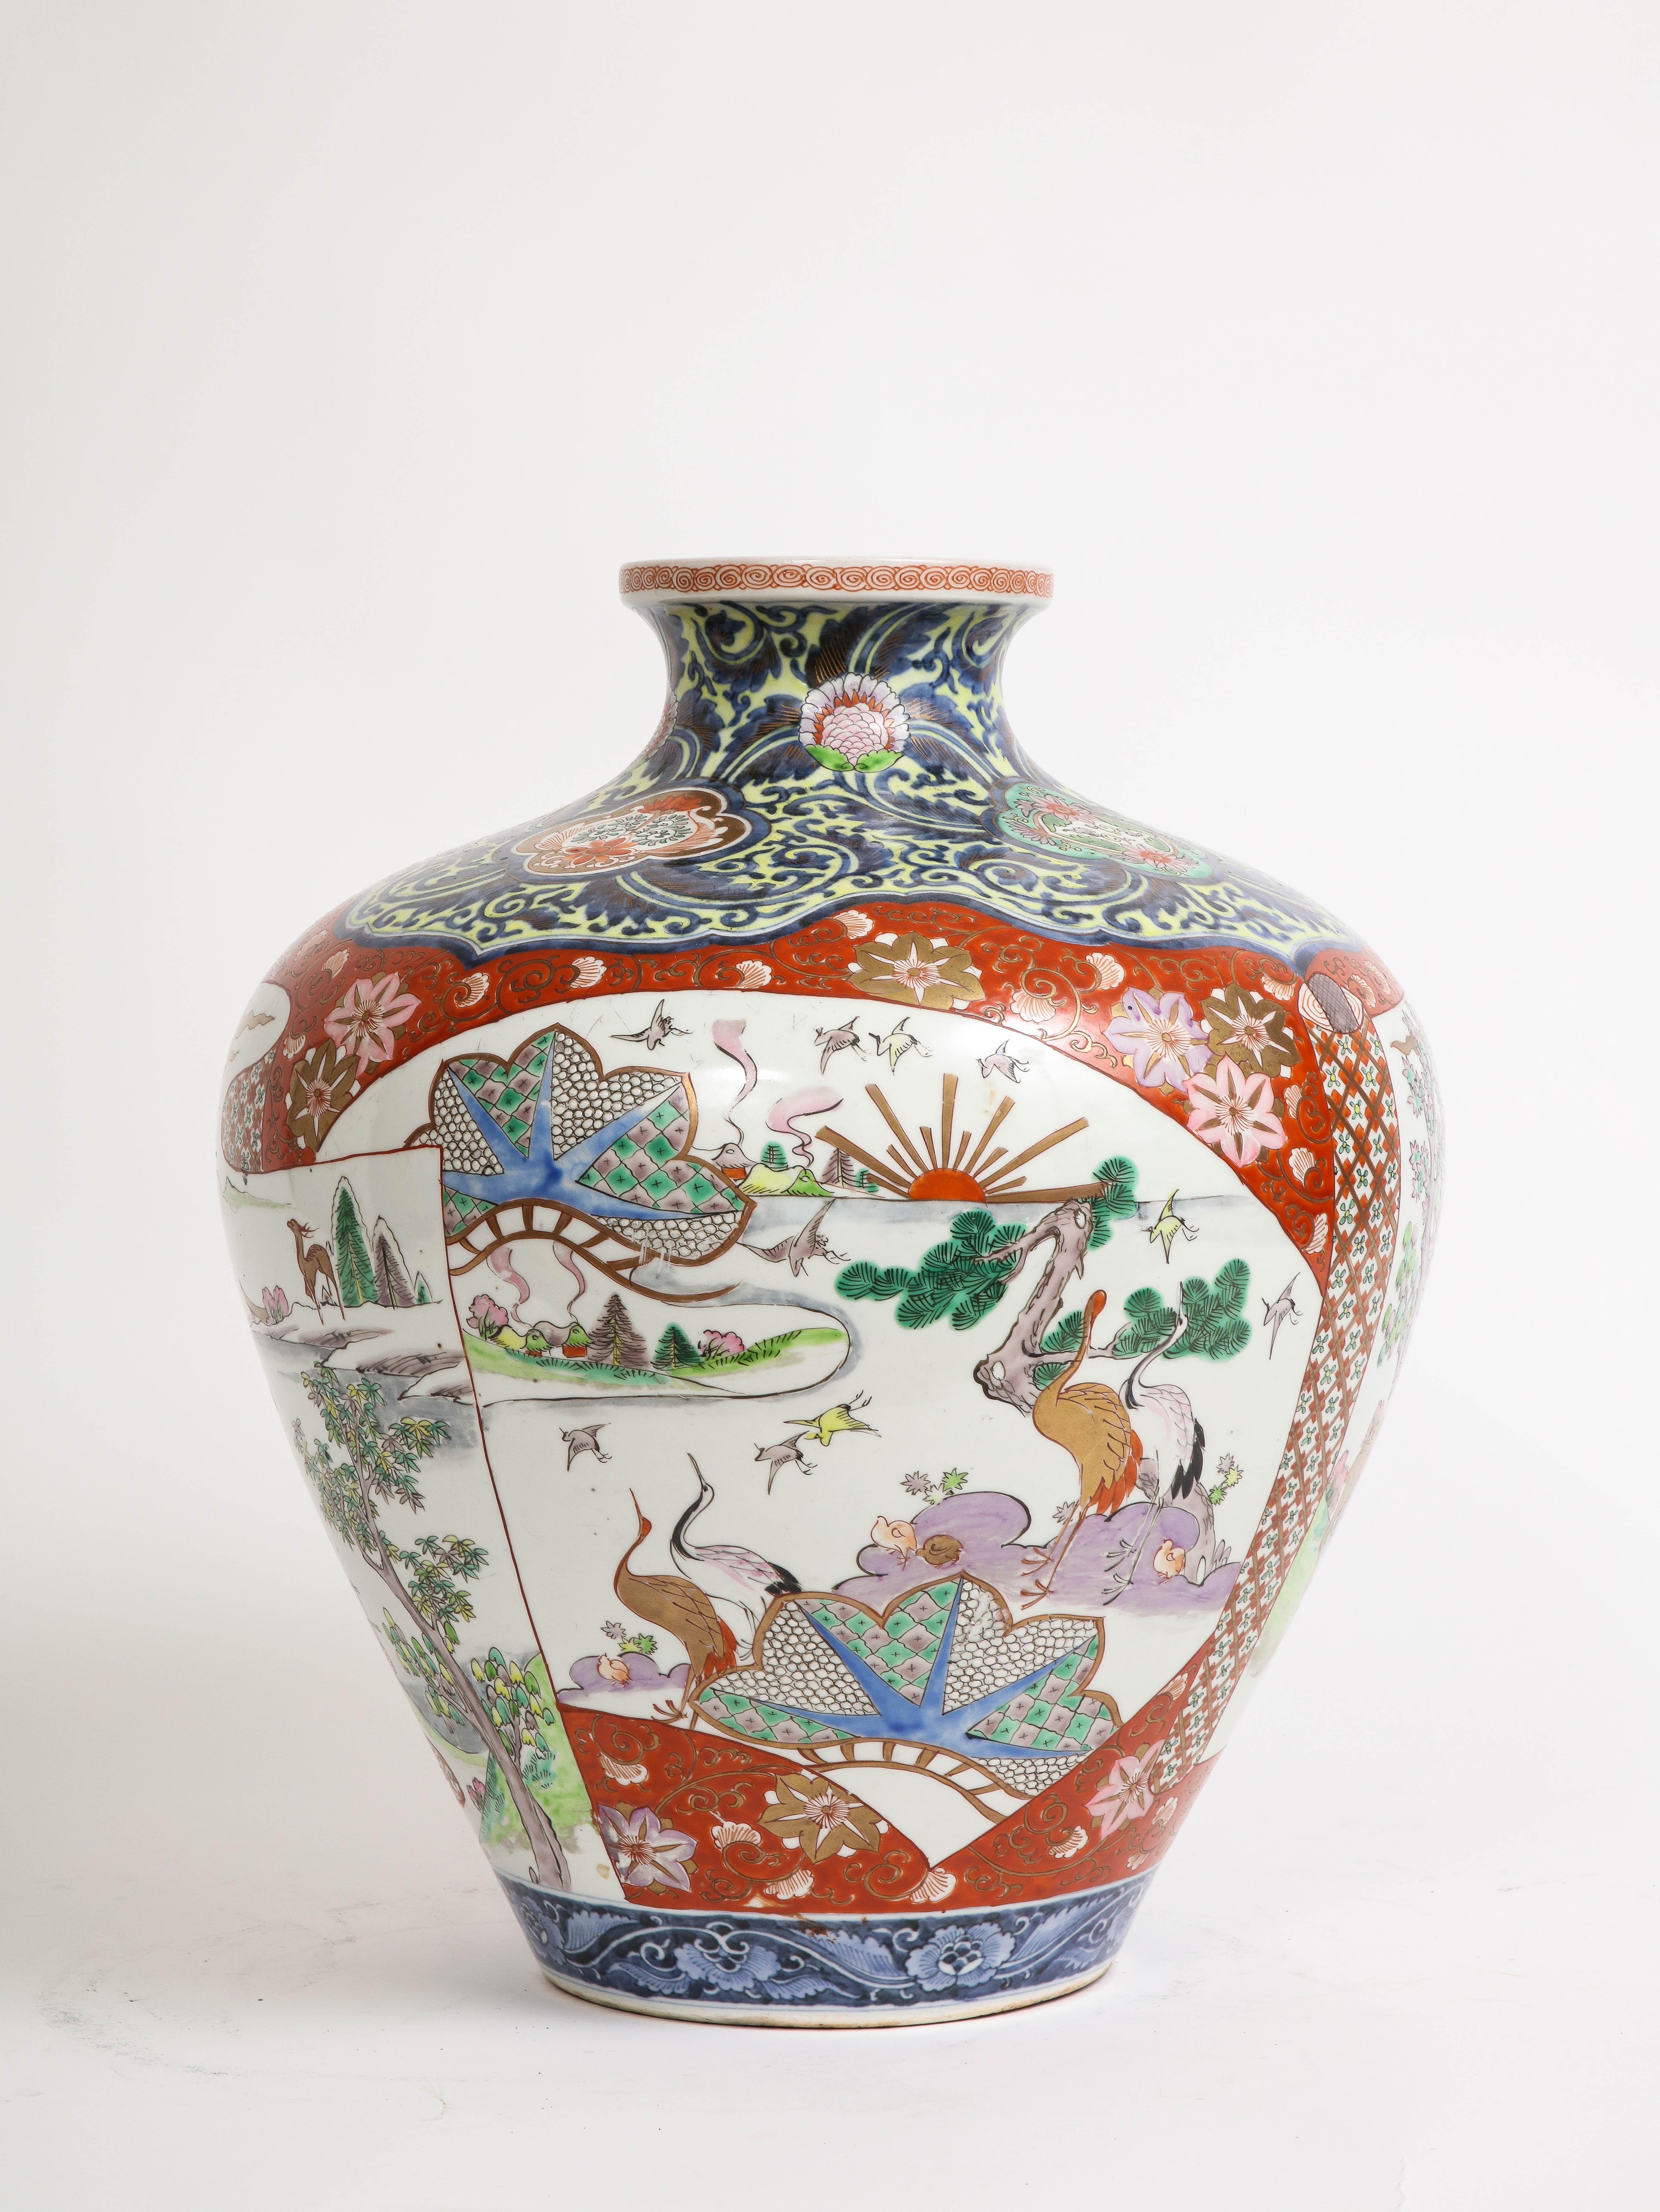 A 19th C. Japanese Porcelain Kutani Red Ground Scroll Cartouche Vase.  This stunning piece features a breathtaking pastoral scene, meticulously hand-painted on a shape reminiscent of an unwrapping scroll, showcasing the timeless beauty of